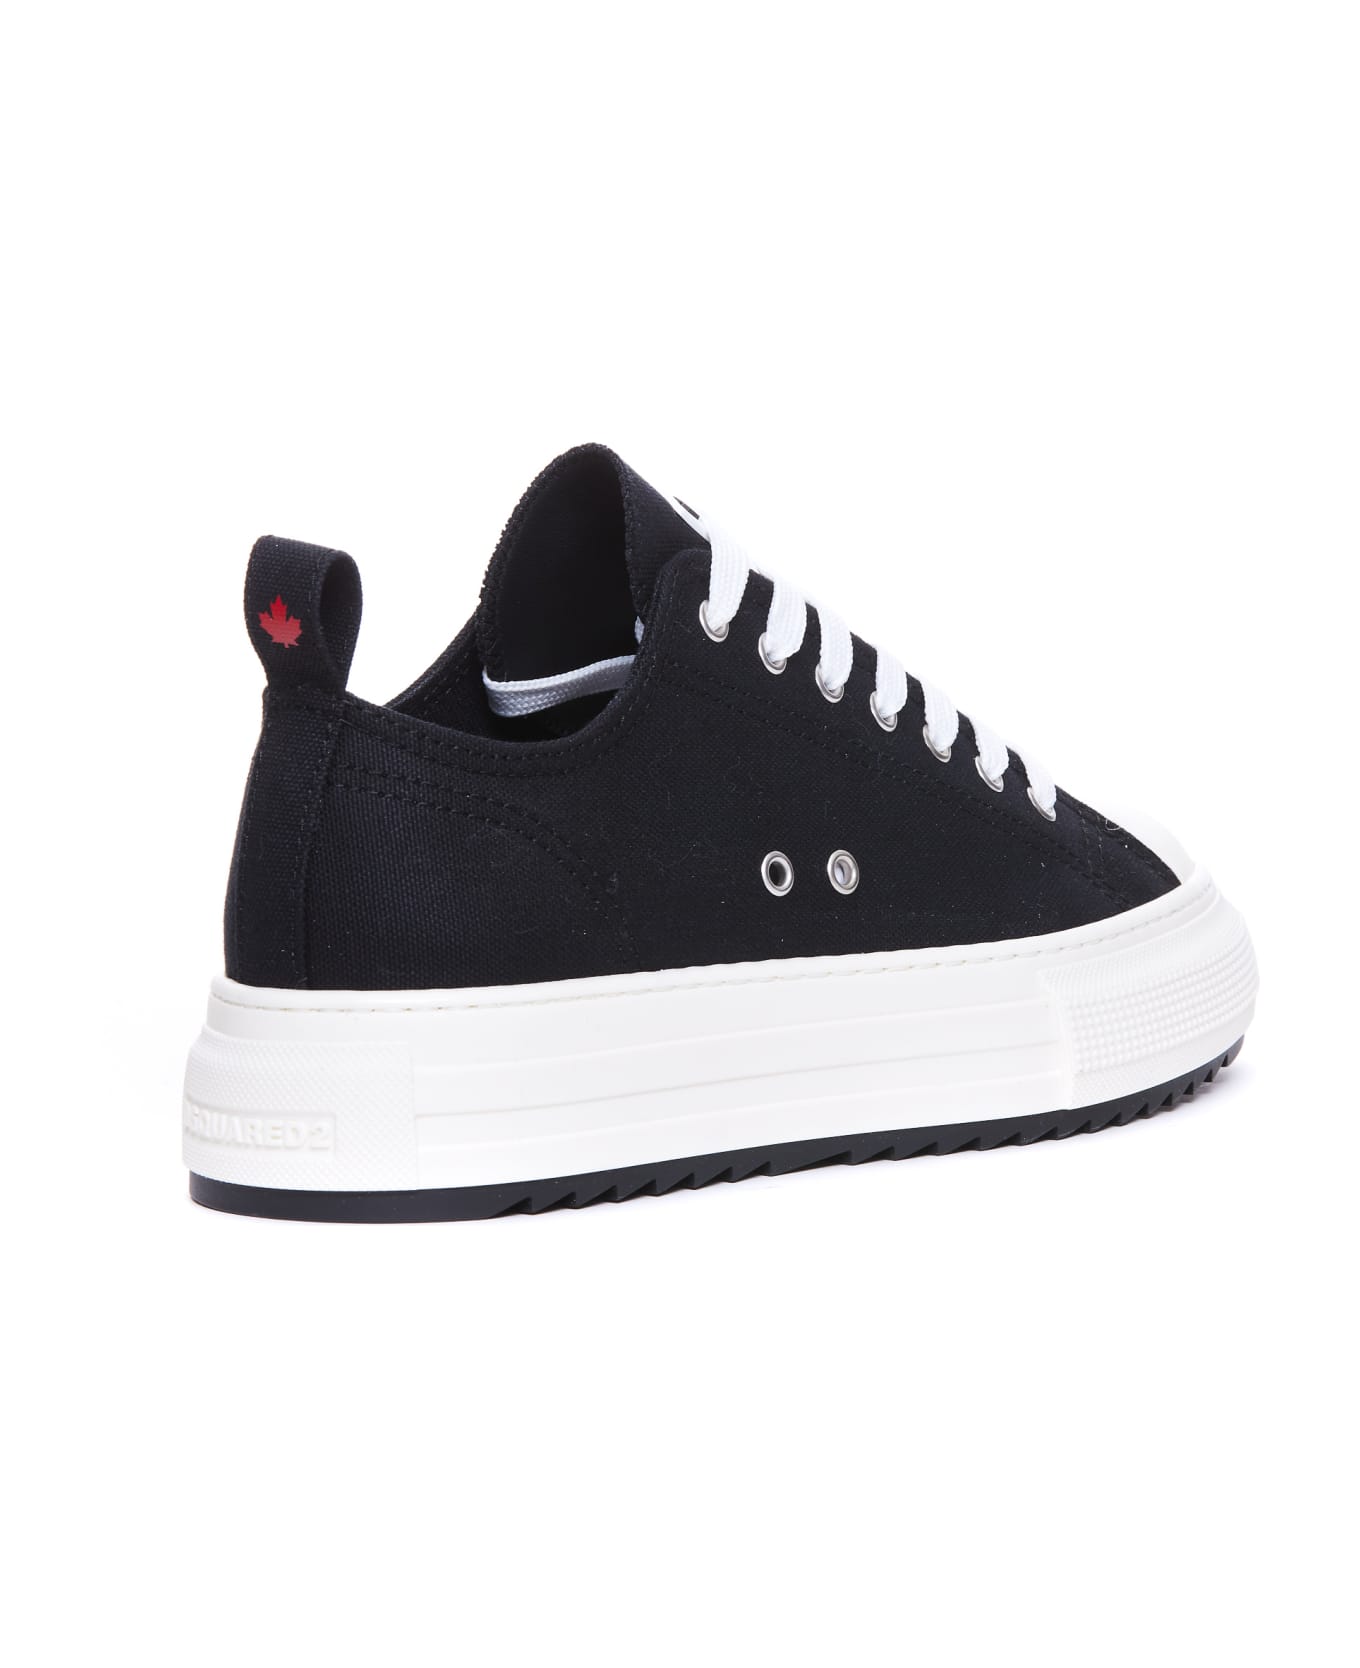 Dsquared2 Berlin Lace-up Low Top Sneakers - Black スニーカー